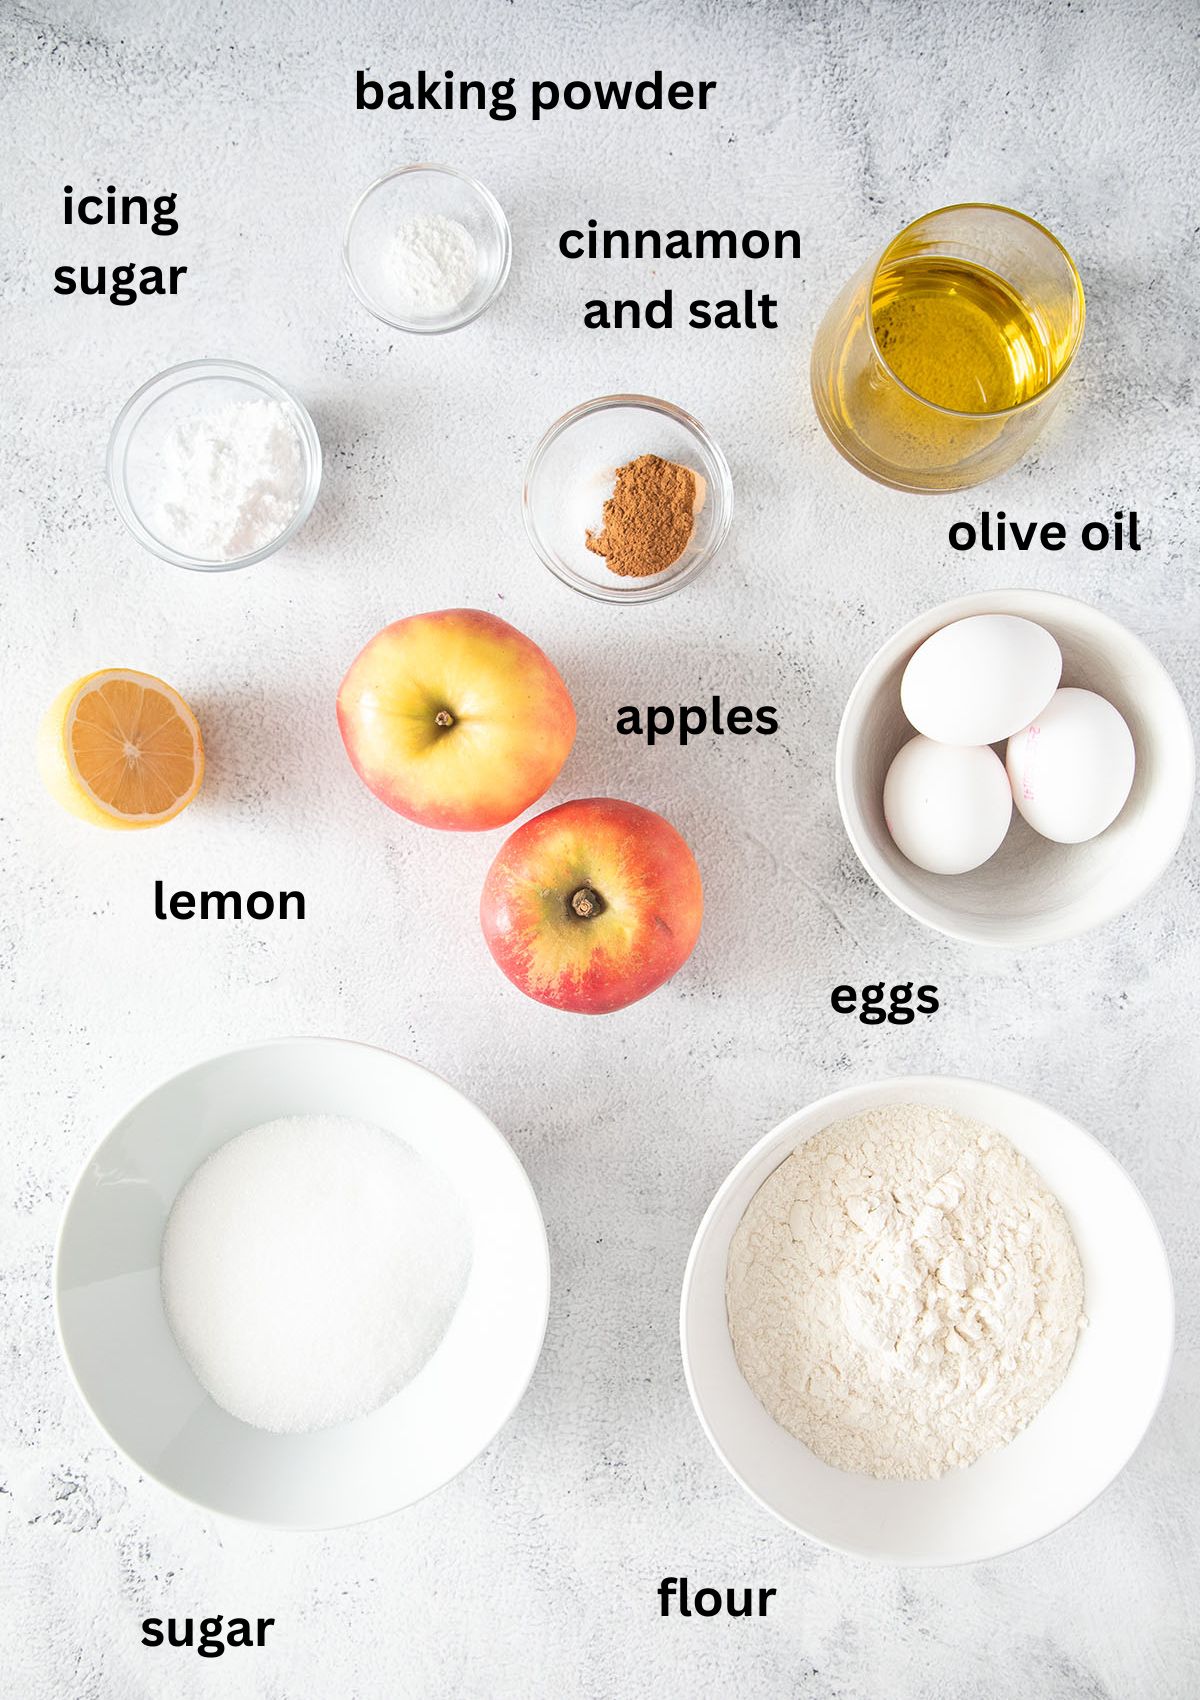 labeled ingredients for apple cake with olive oil and cinnamon.